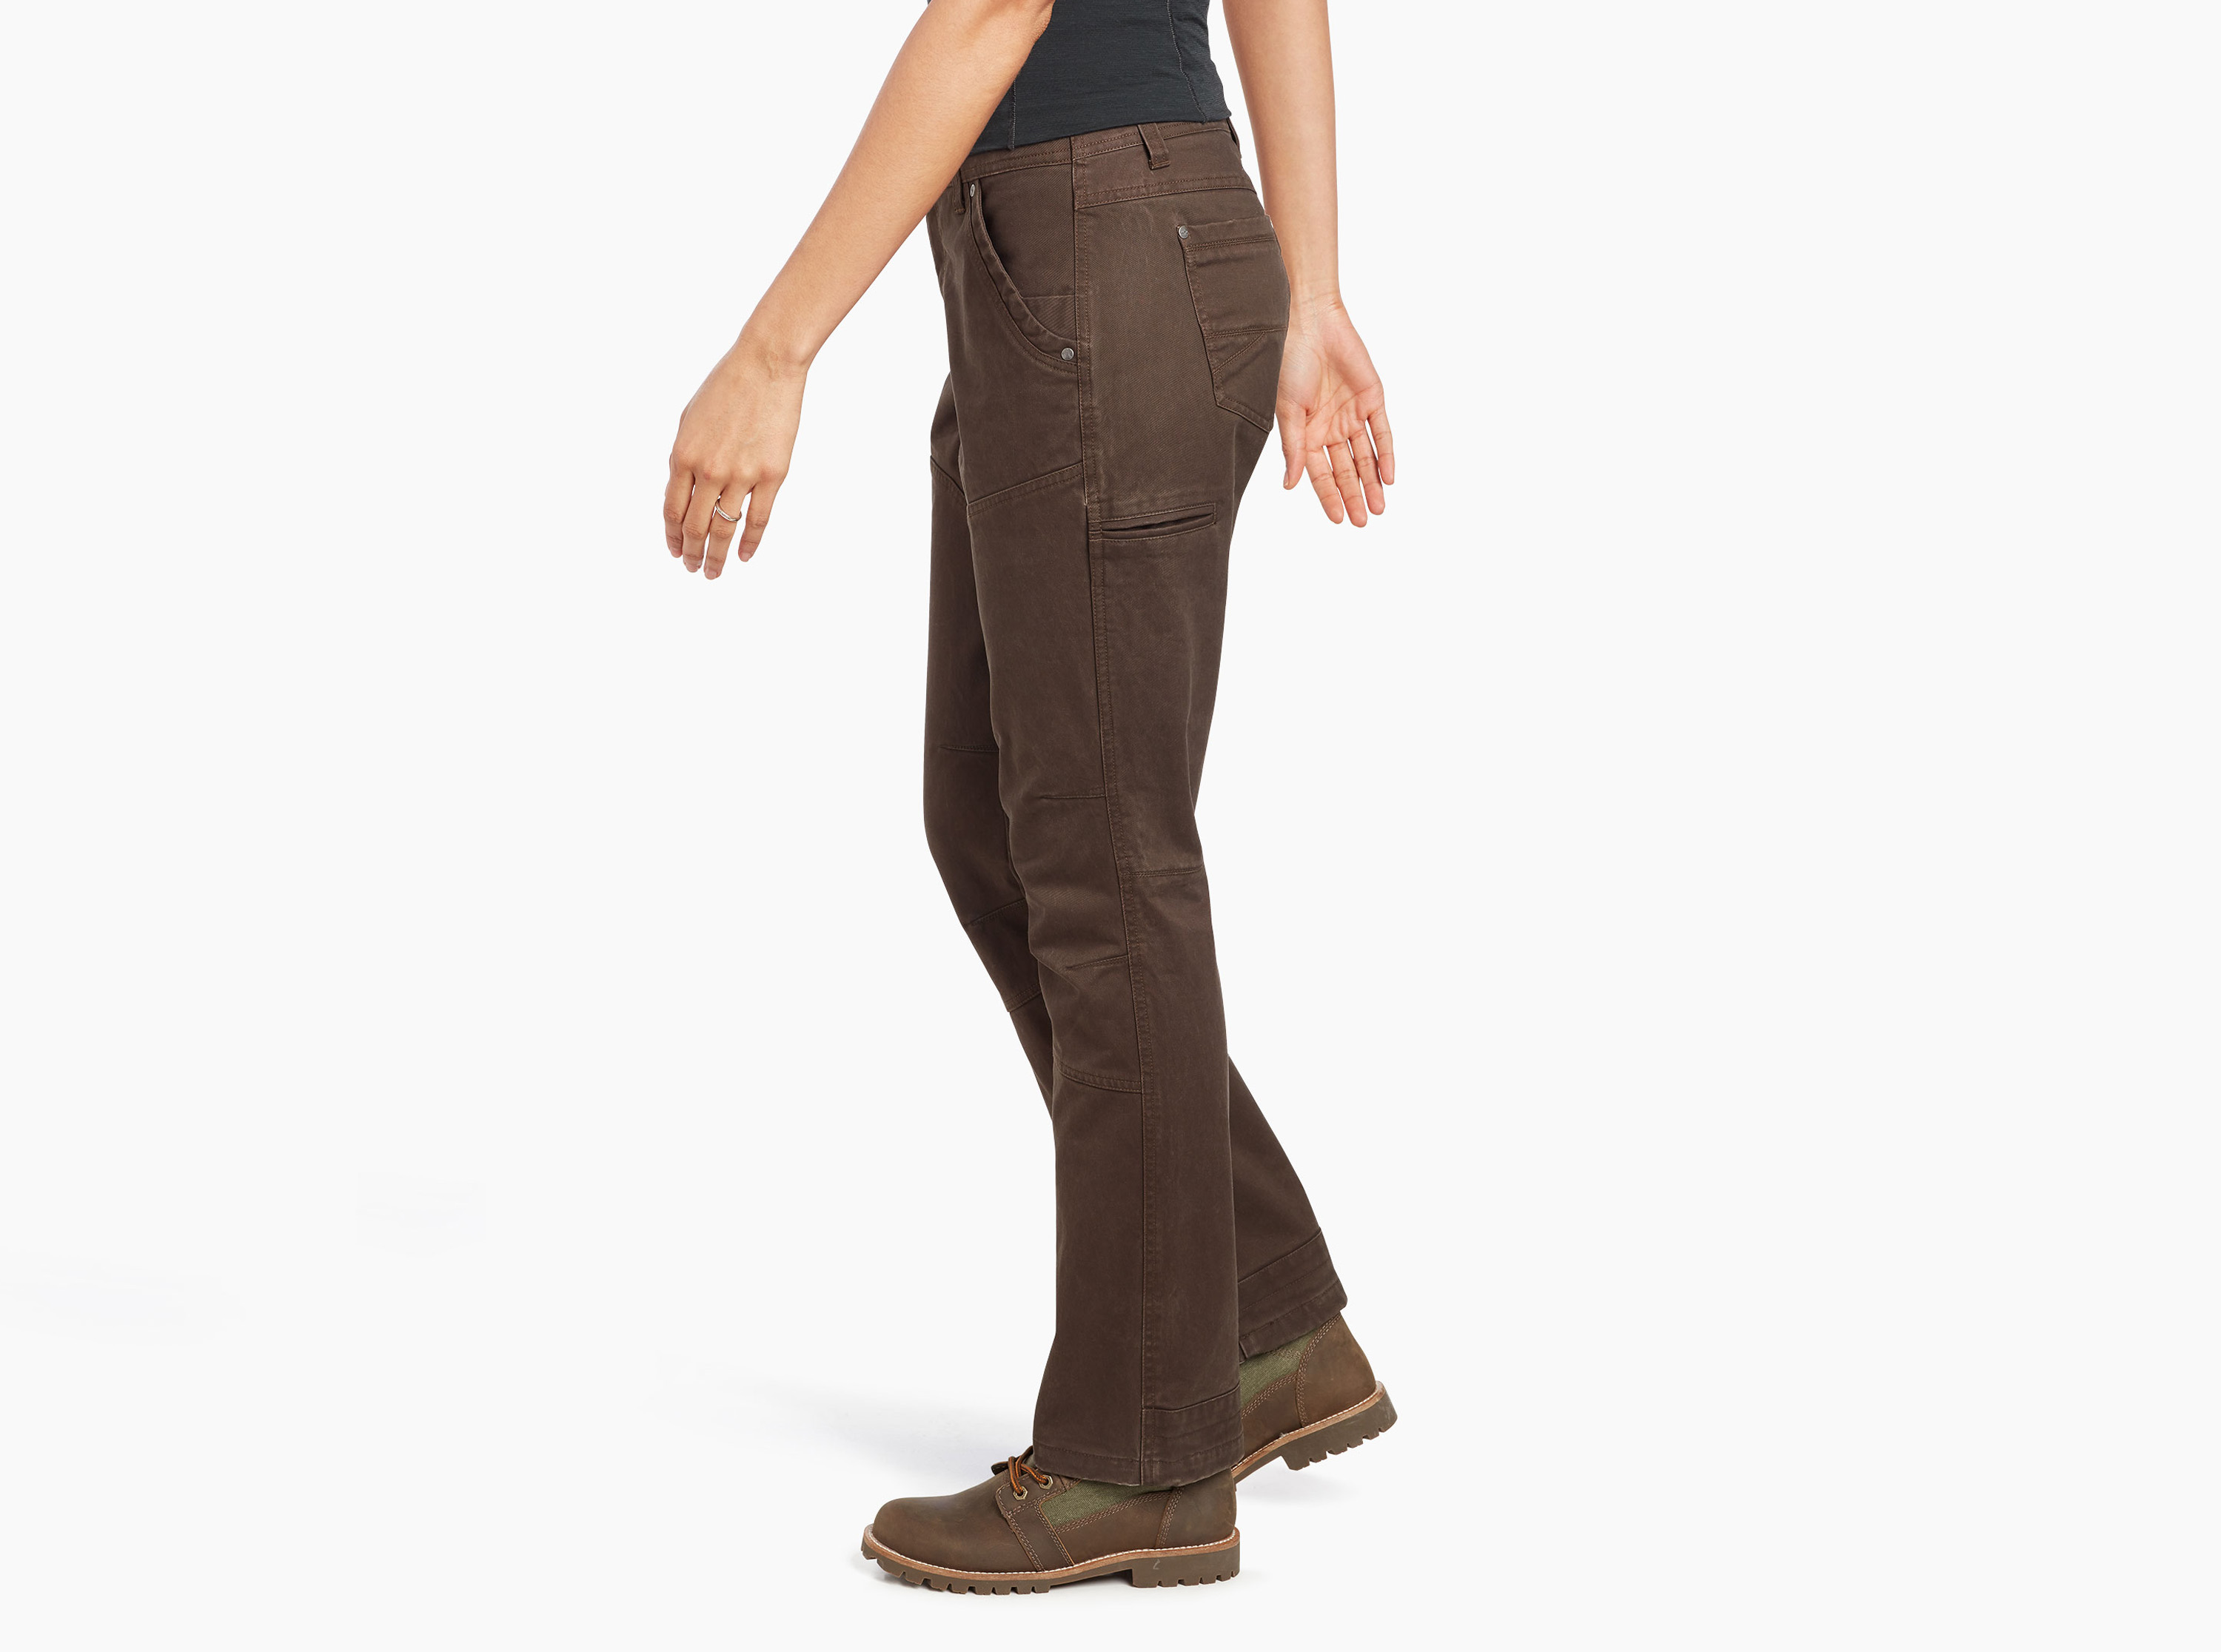 Rydr™ Pant in Women's Pants